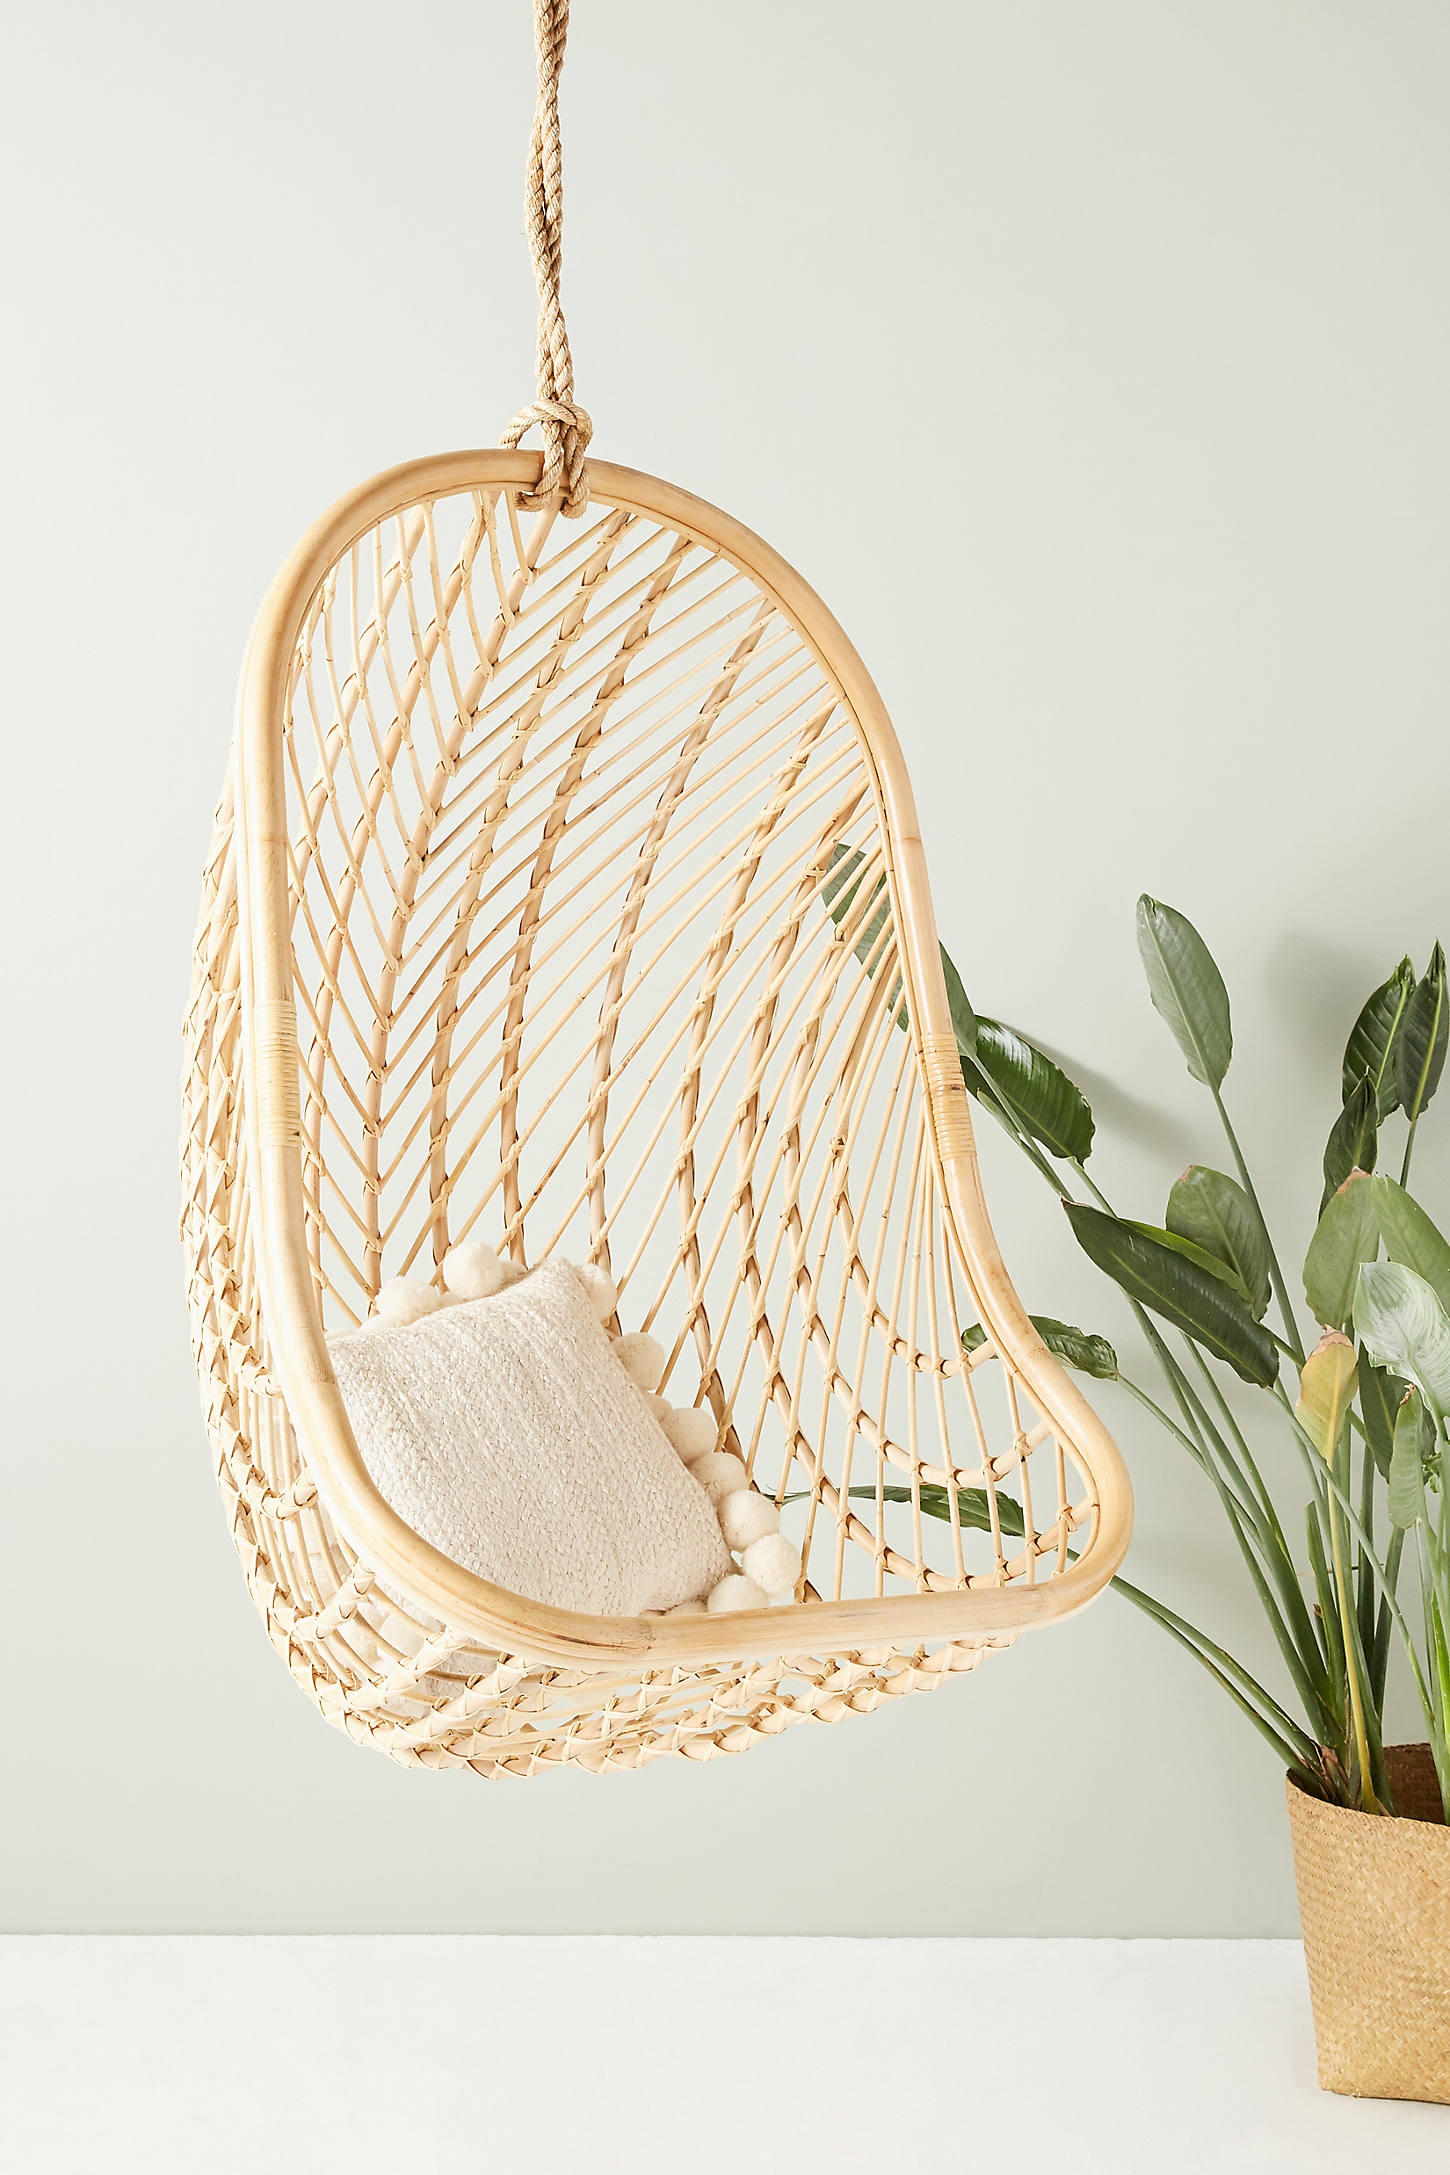 Nest Hanging Chair - Image 0